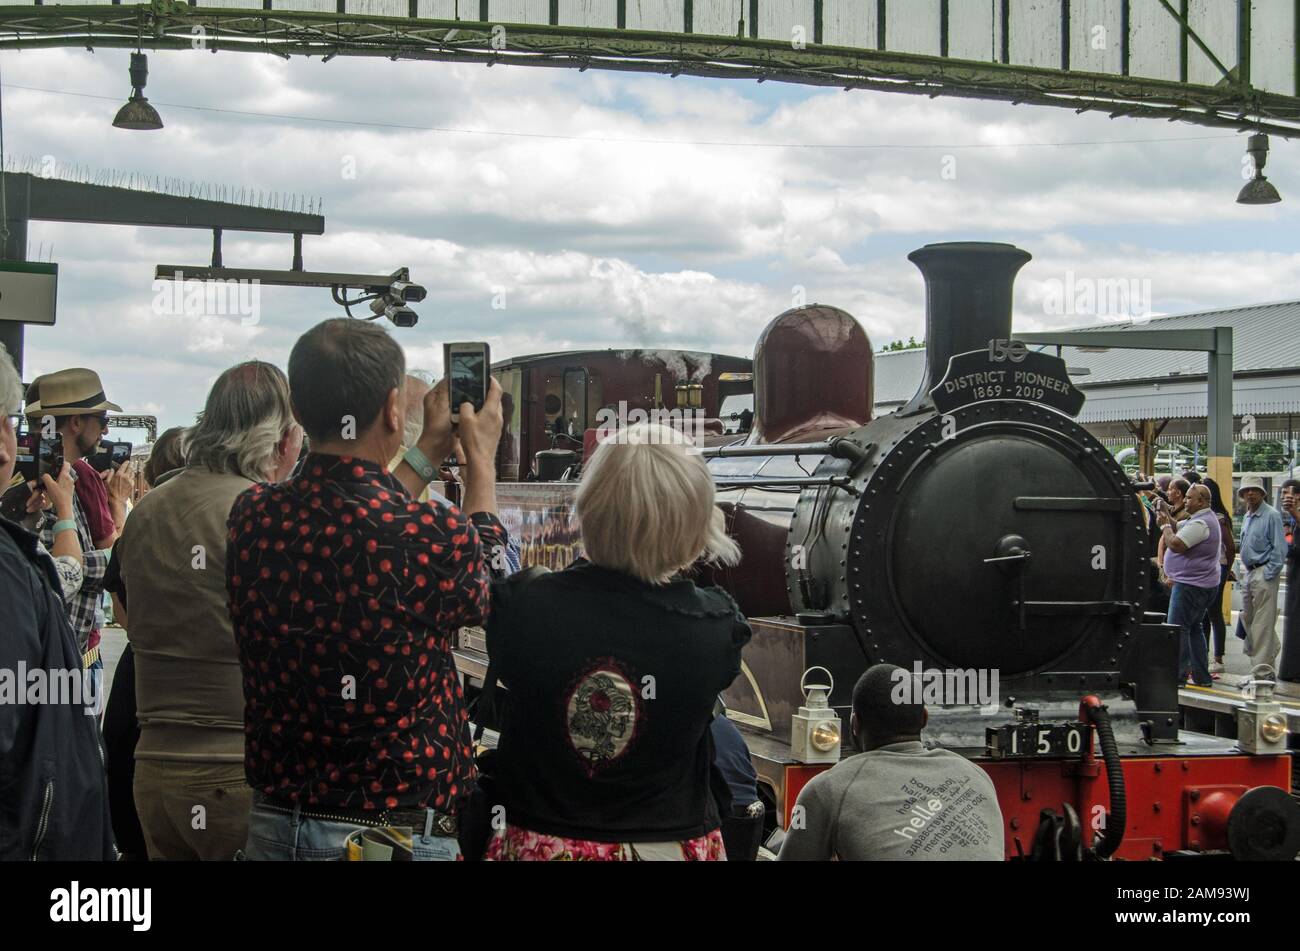 London, UK - June 22, 2019: Spectators enjoying the arrival of the last steam train to run on the District Line to Ealing Broadway Station. The specia Stock Photo